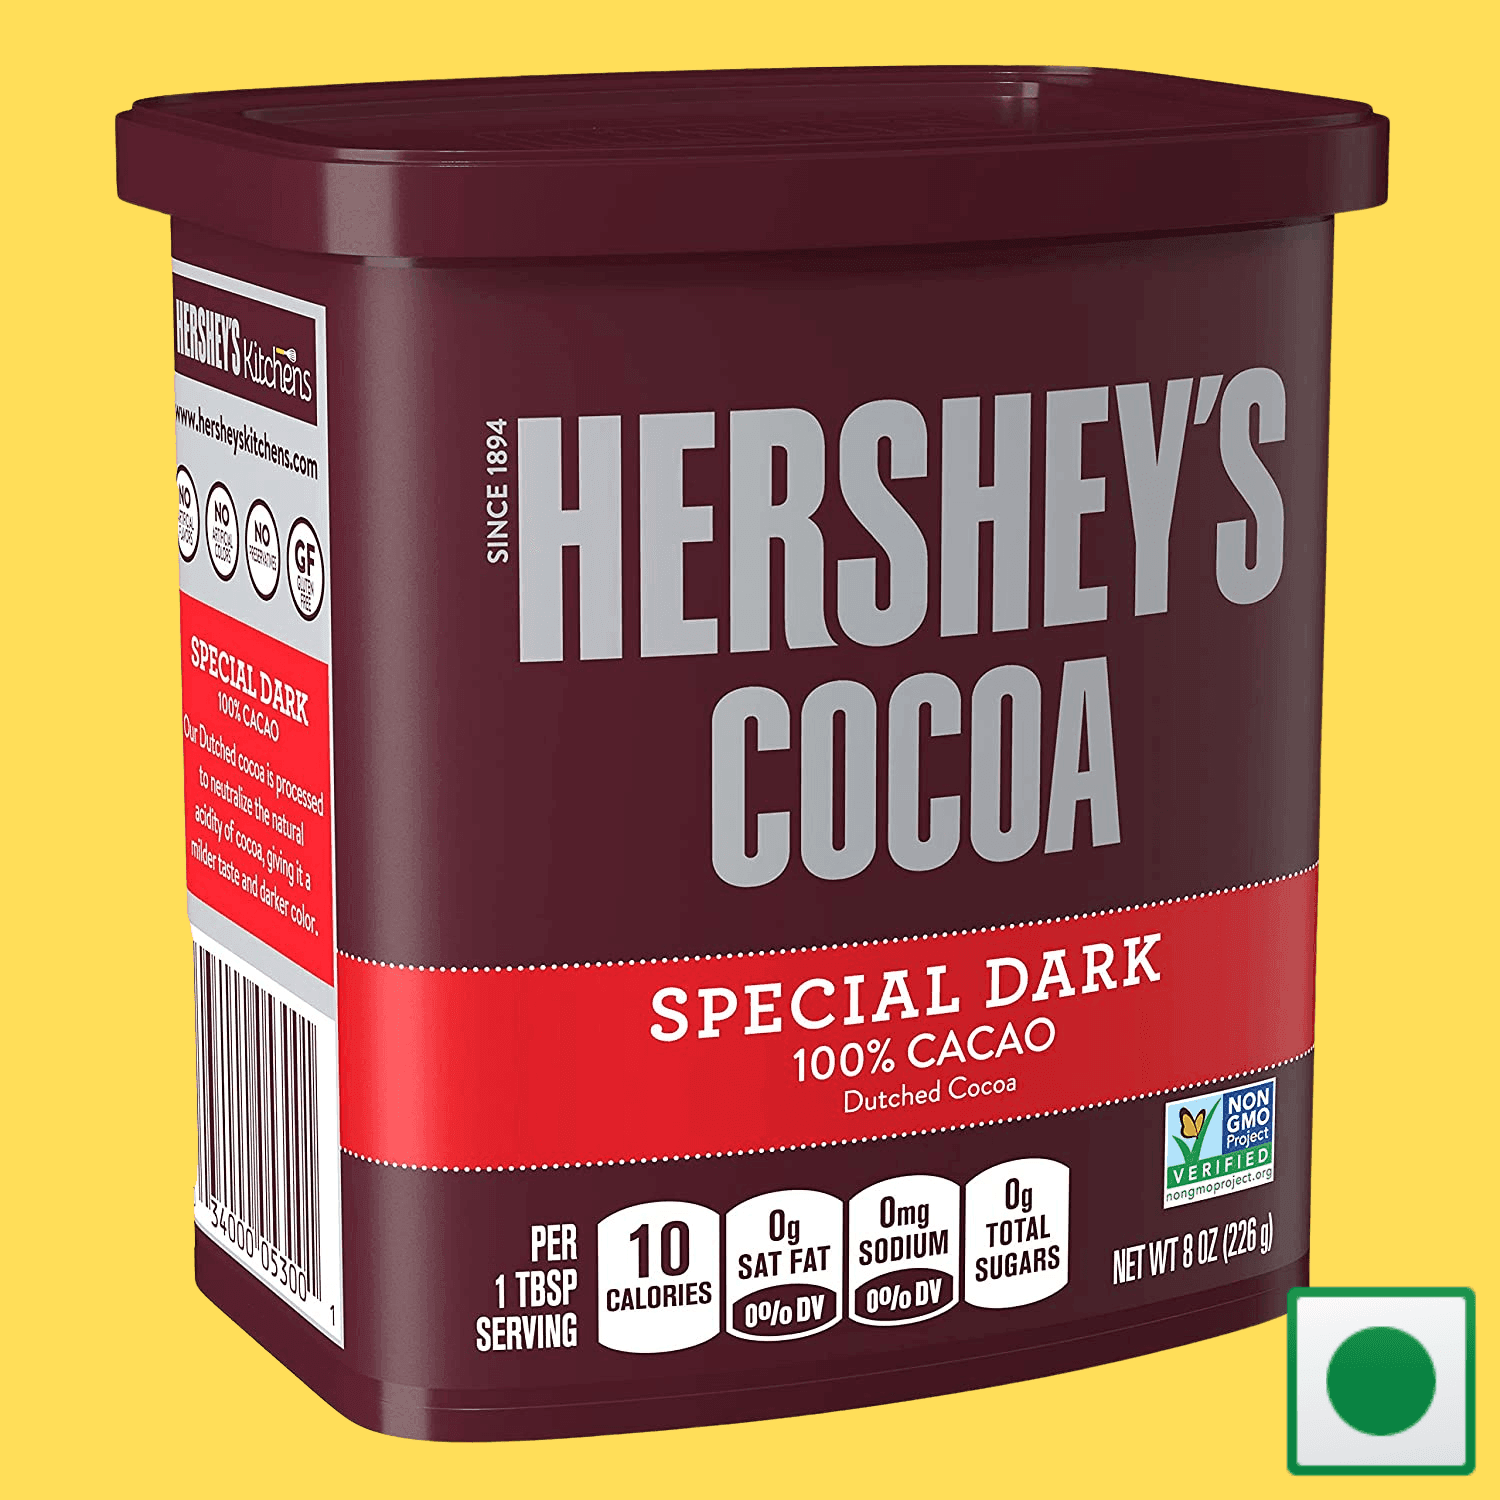 Hershey's Cocoa Special Dark 226g (Imported) - Super 7 Mart